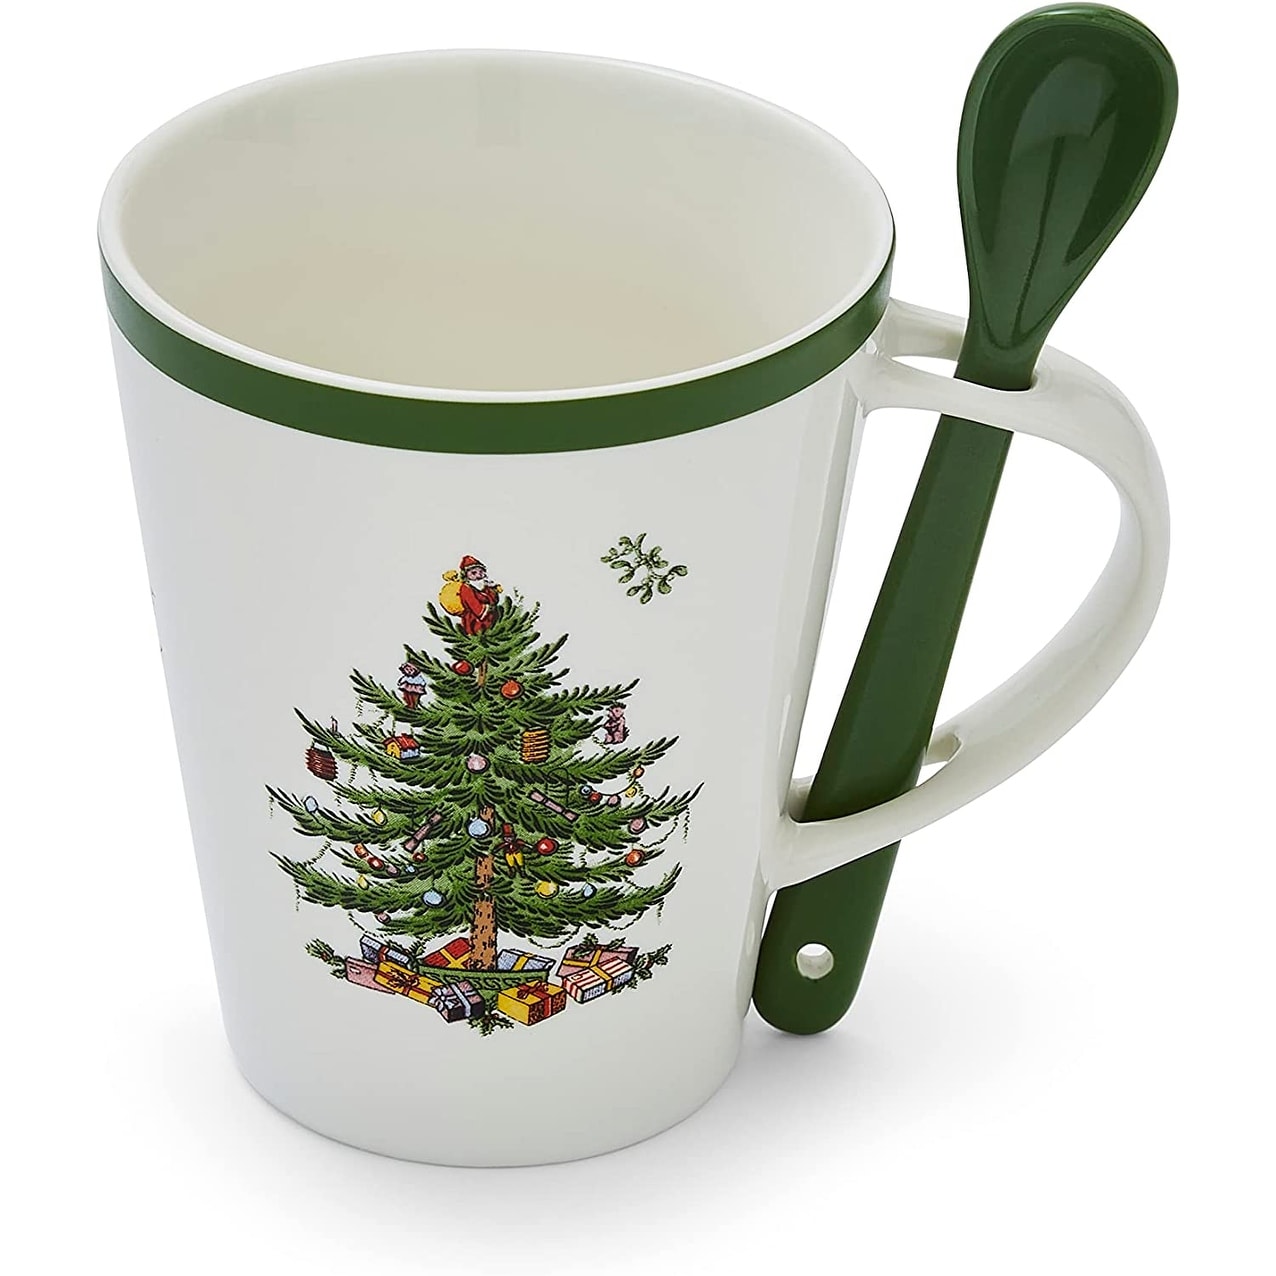 https://ak1.ostkcdn.com/images/products/is/images/direct/e4c3fcc47a019e56771b9a00620a6087b418637a/Spode-Christmas-Tree-Traditional-14-Ounce-Mug-and-Spoon-Set.jpg